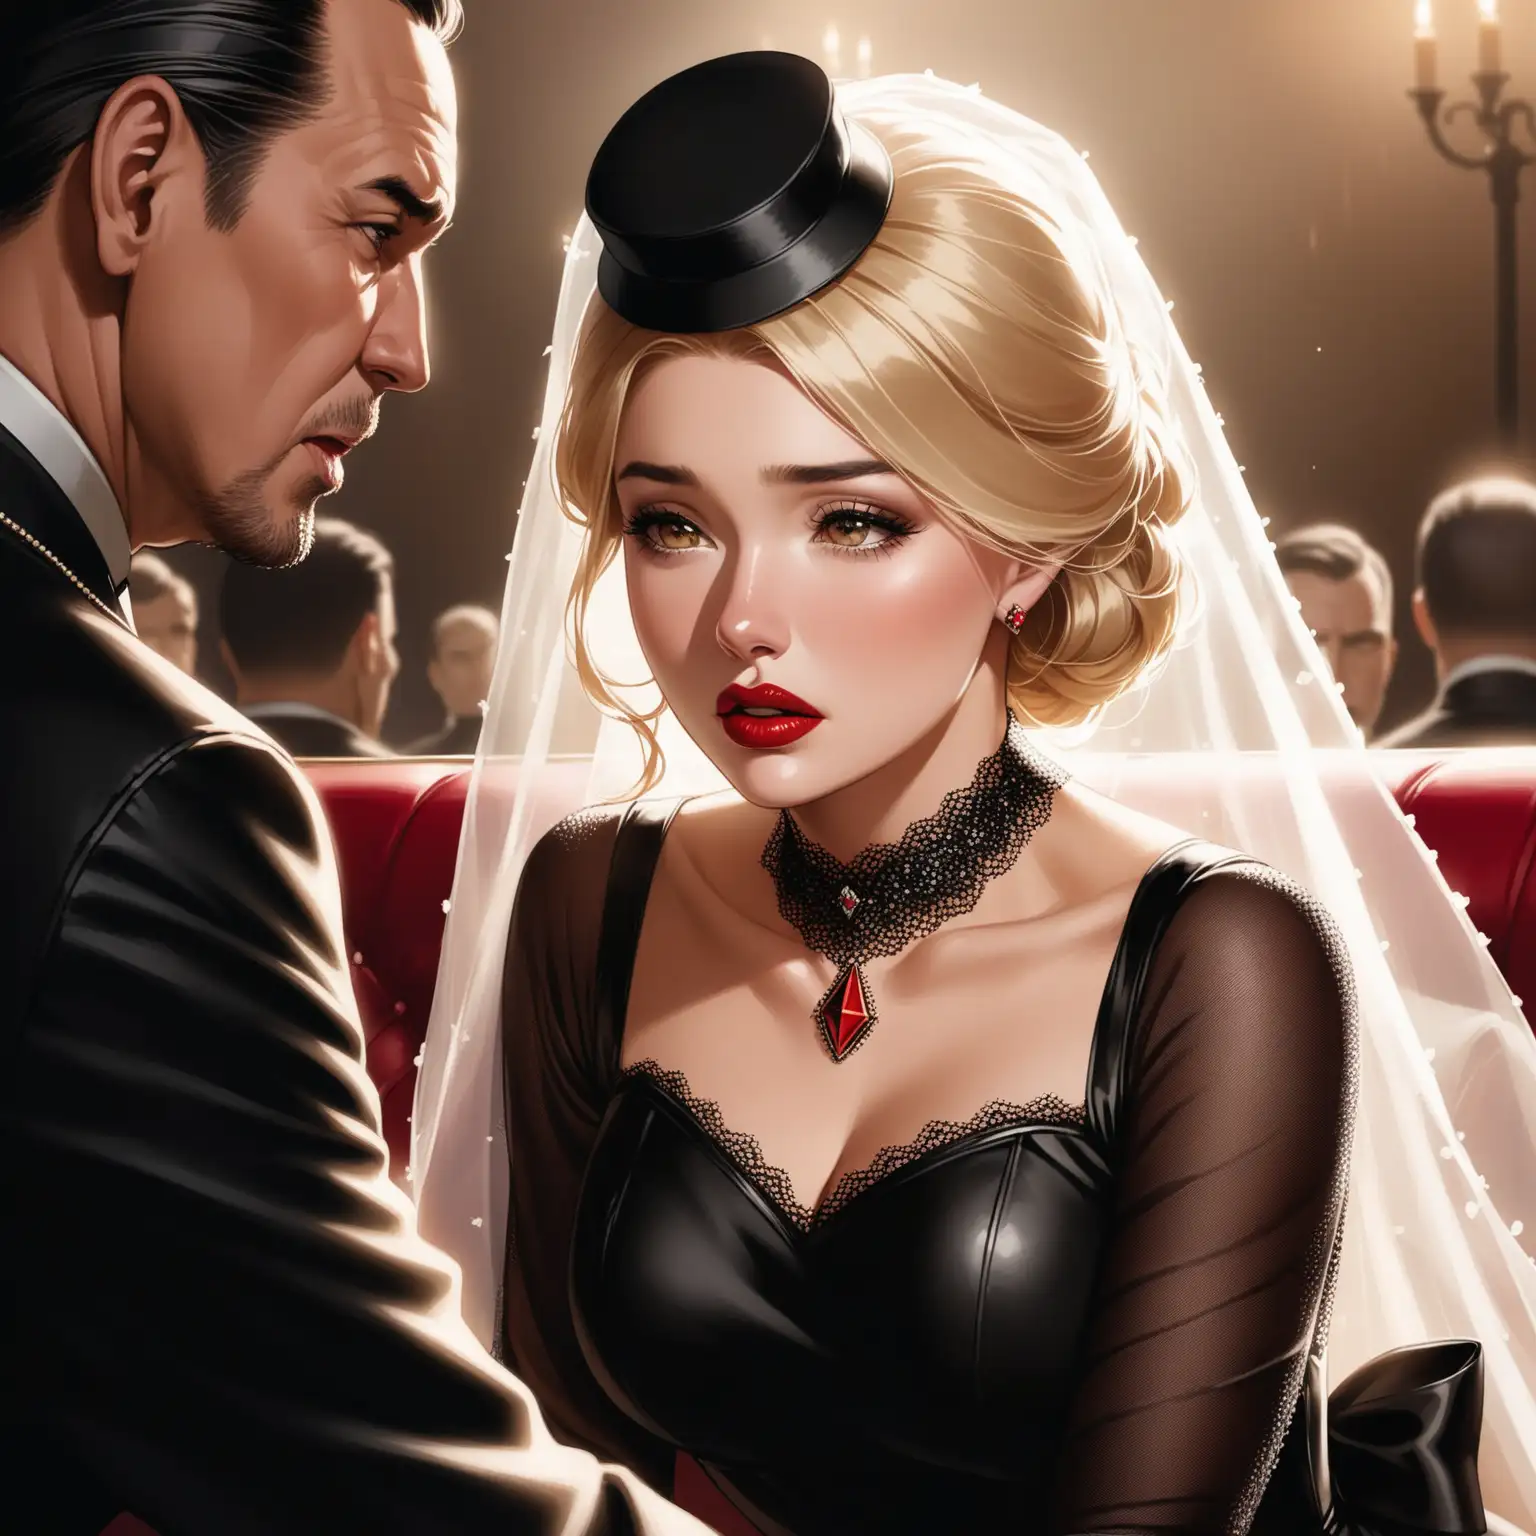 A beautiful blonde woman with full red lips sits across from a man in his 50’s her facial expression is devastated. She wears a black small pin hat with a veil and a leather and sheer black dress.